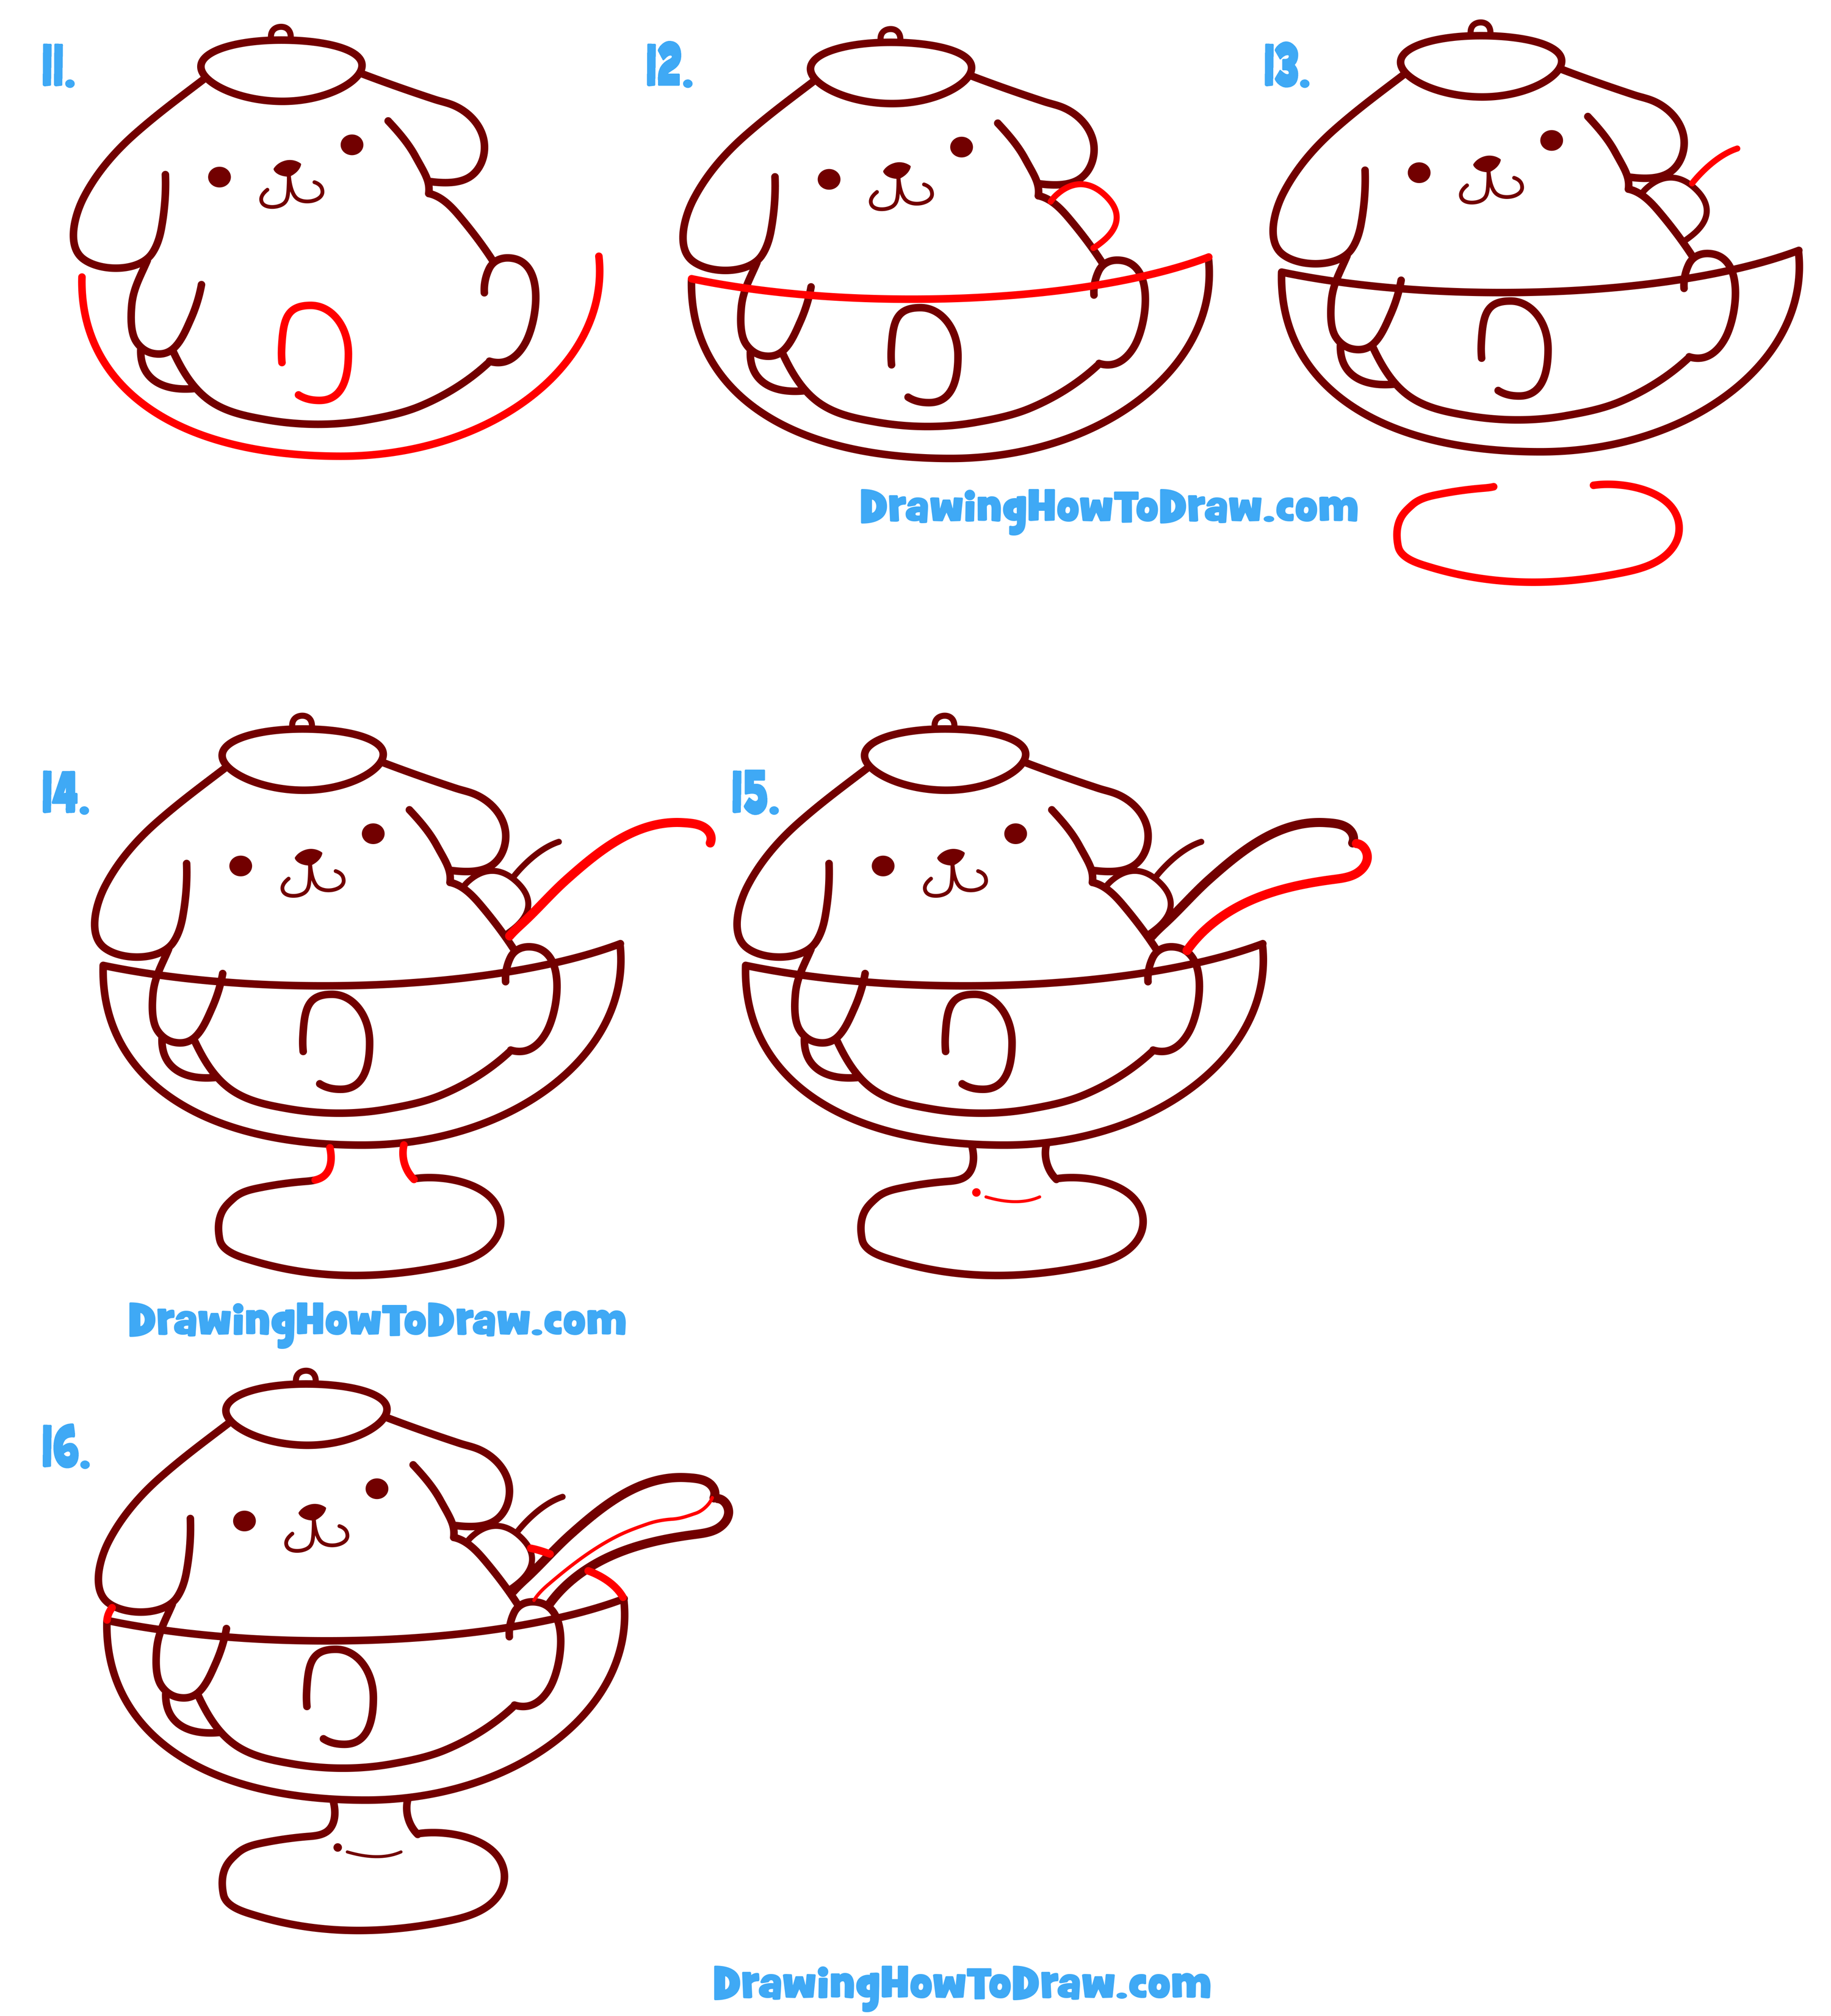 How to Draw Pompompurin from Hello Kitty Easy Step by Step Drawing